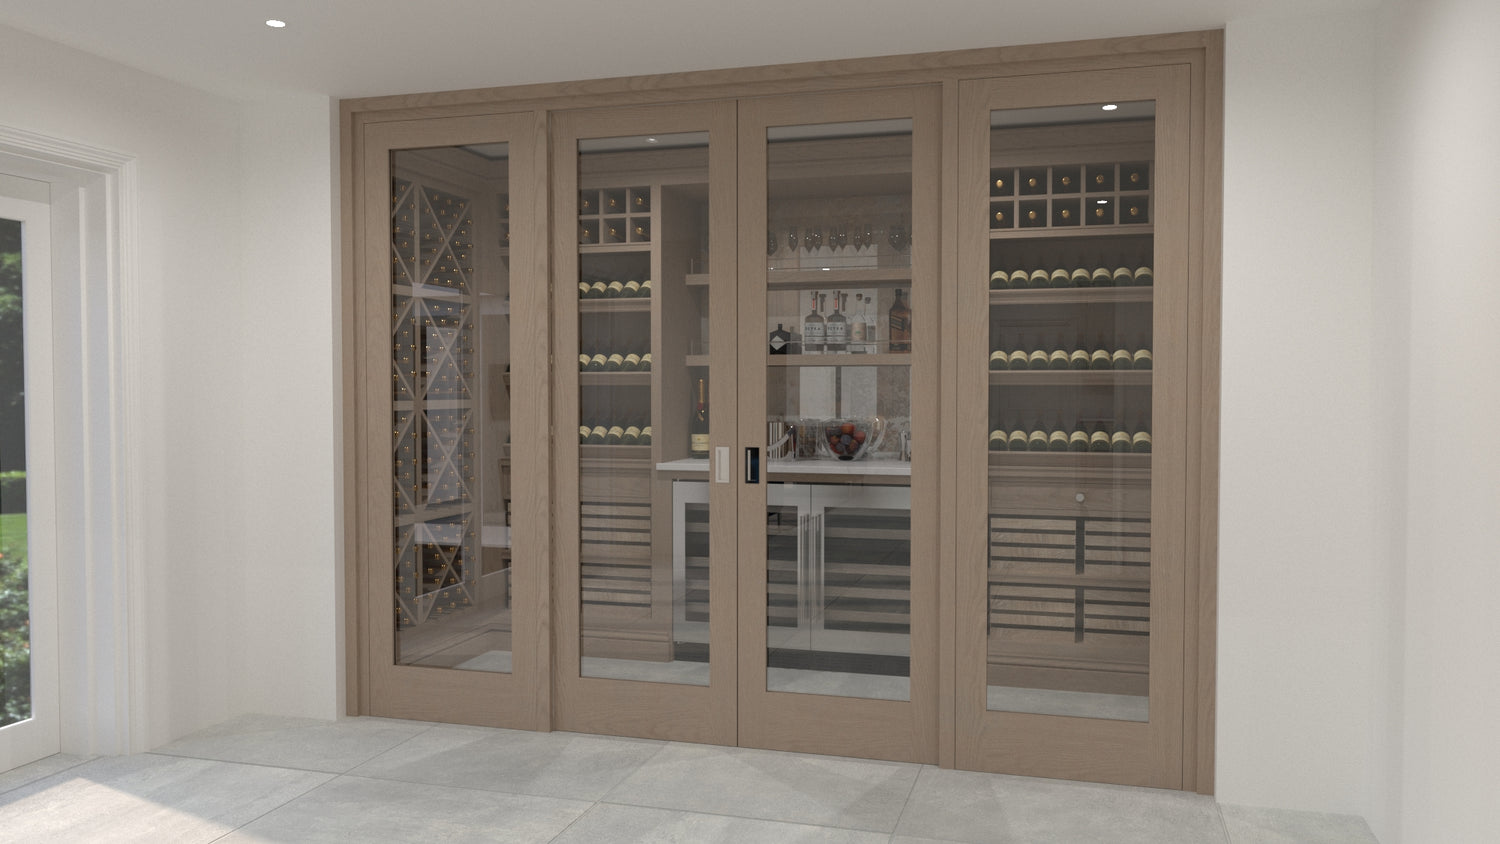 Bars and Wine Rooms